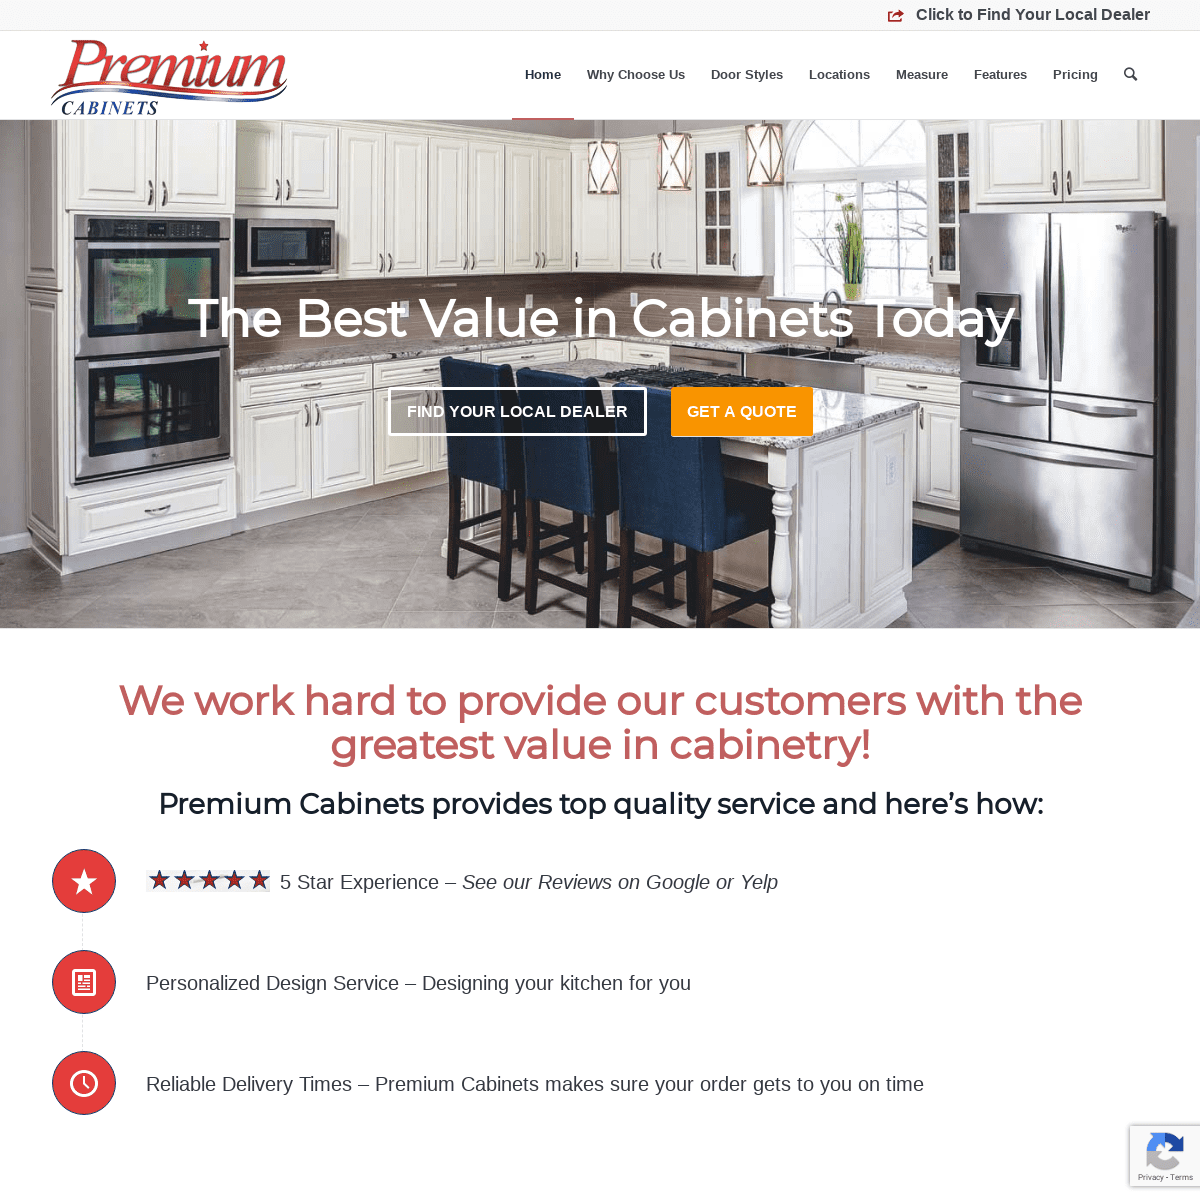 Premium Cabinets | High Quality Kitchen Cabinets